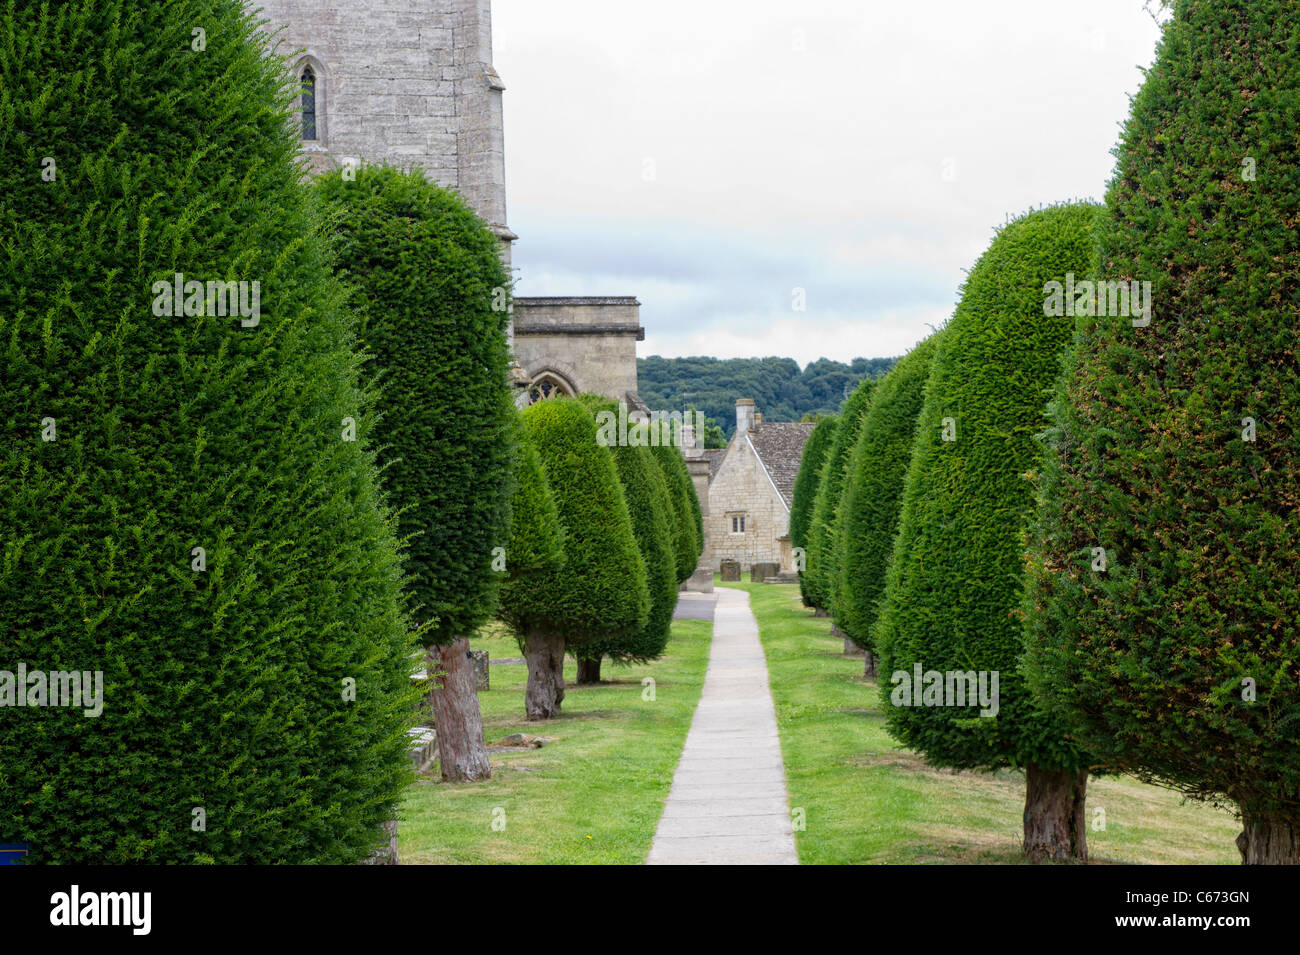 Beautifully shaped Yew trees border the pathways in the grounds of St Mary's Parish Church in Painswick, Gloucestershire Stock Photo